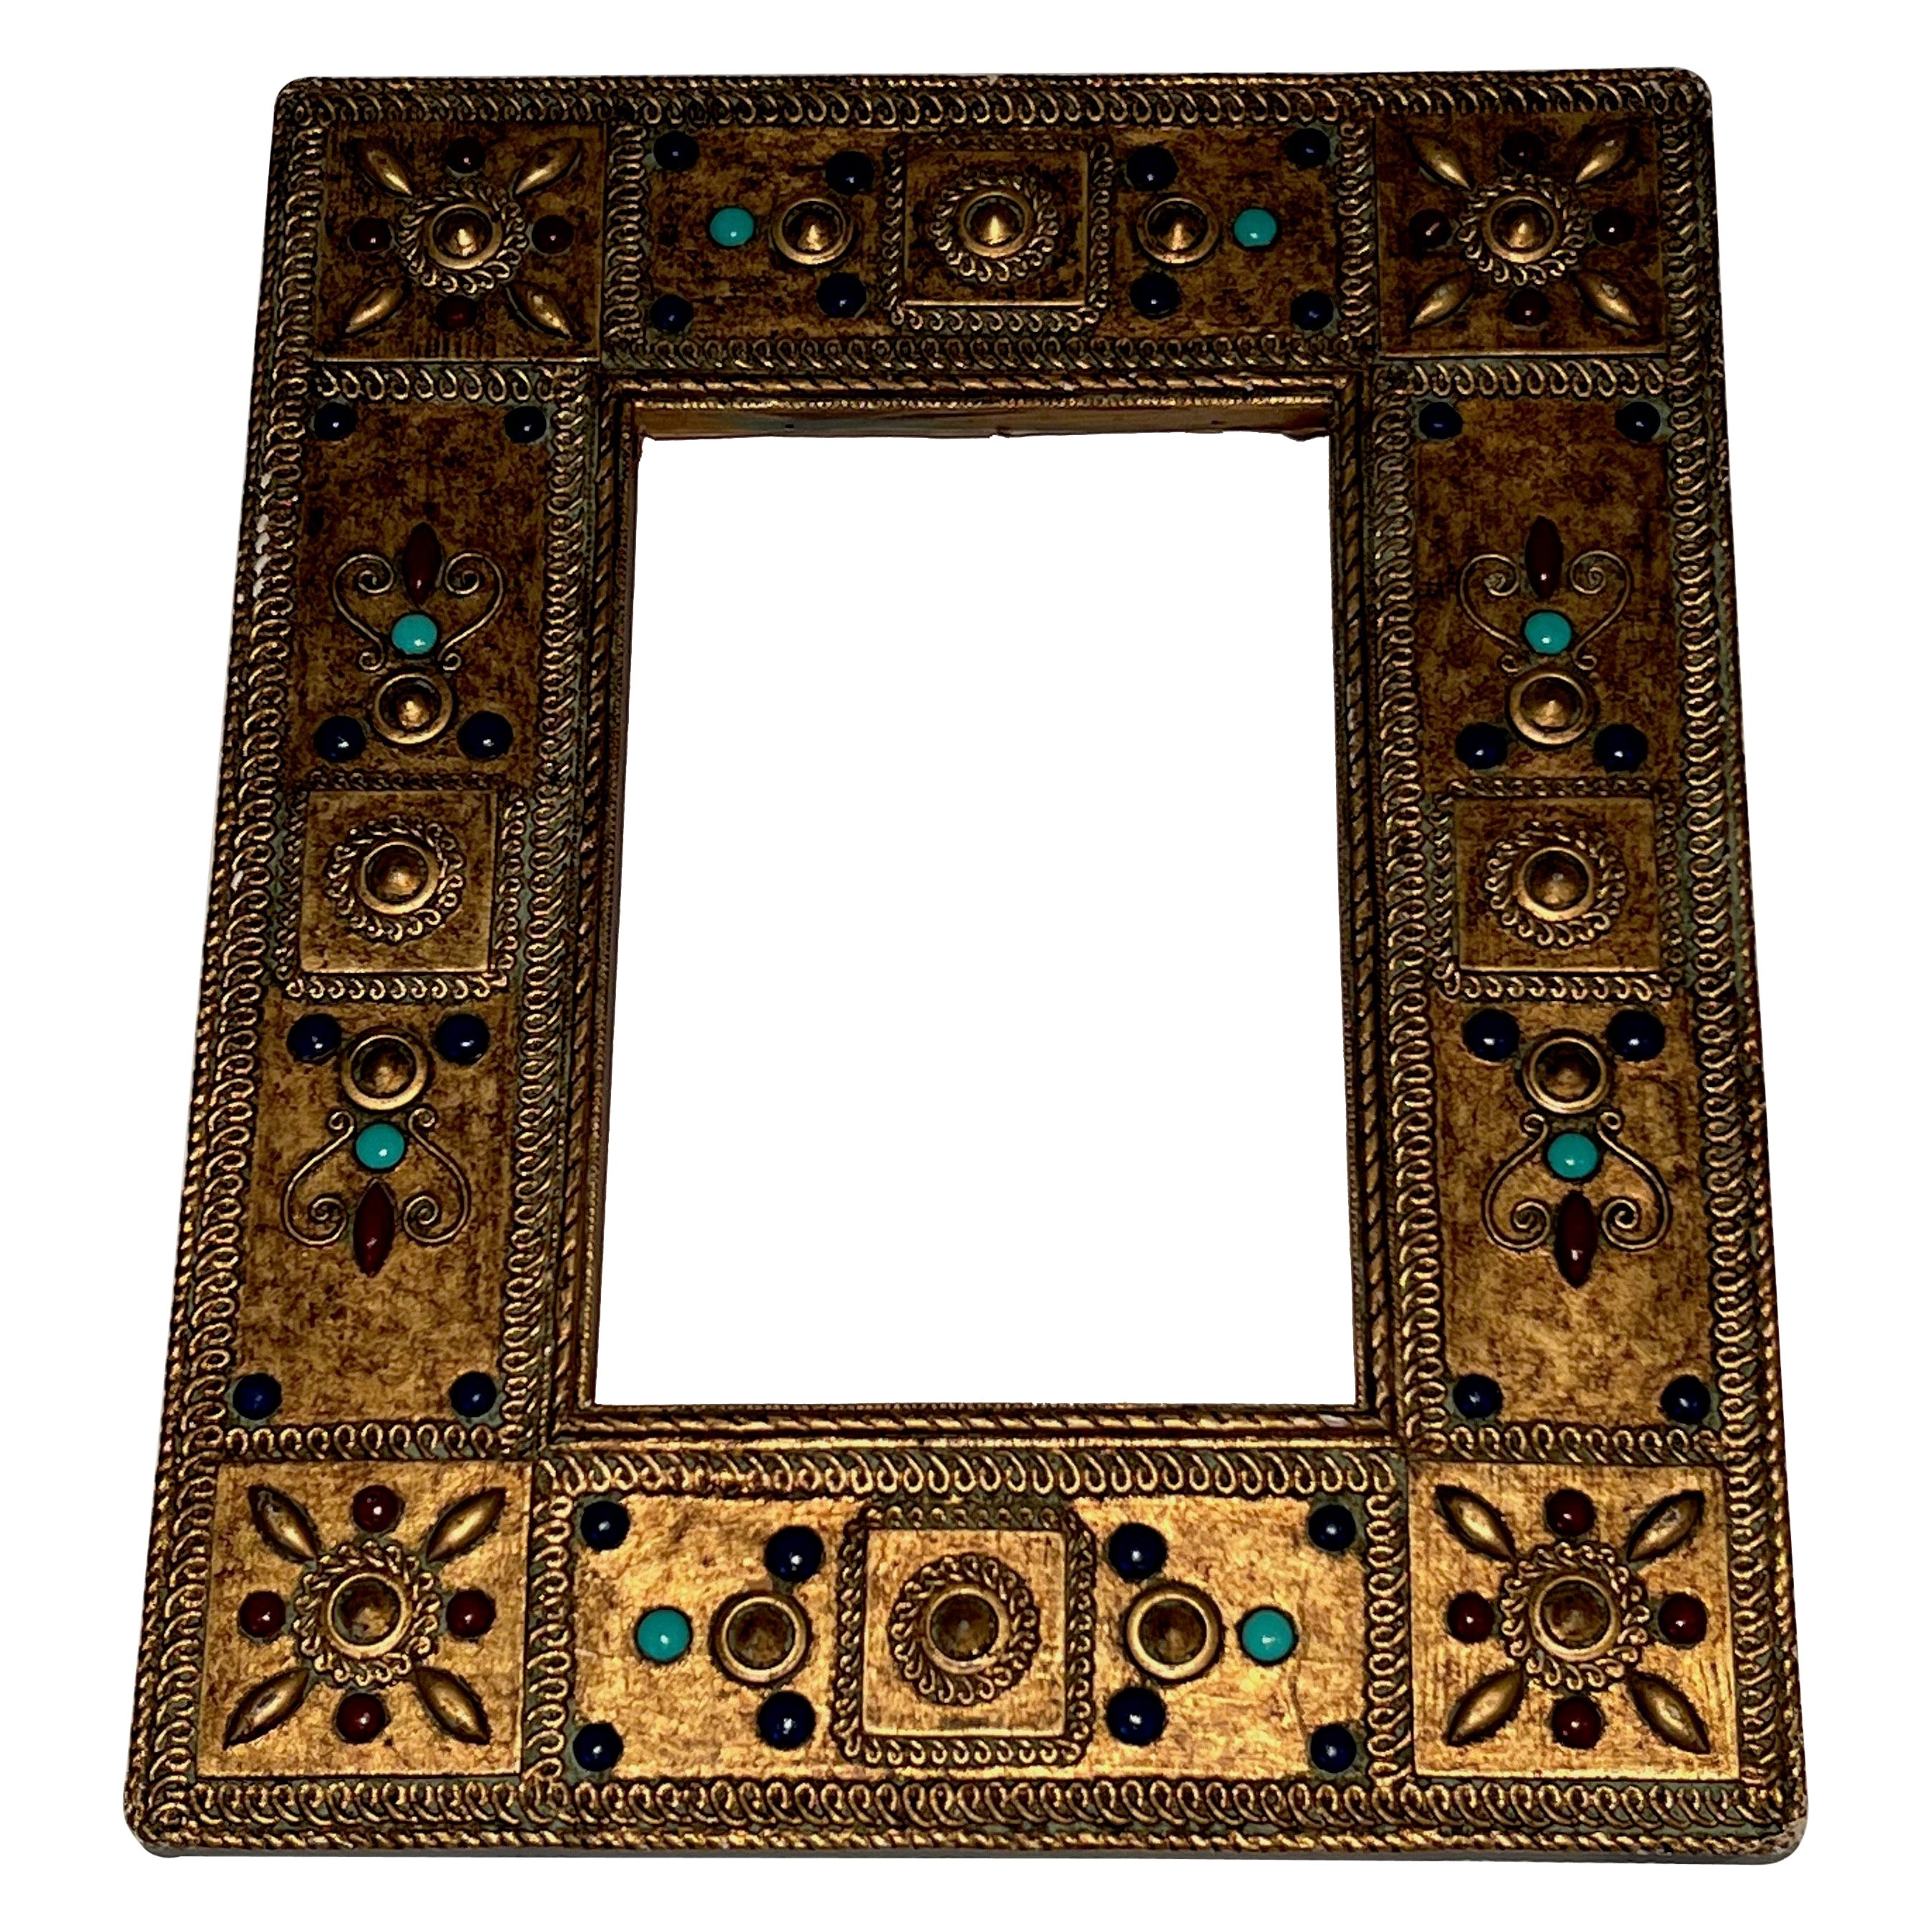 Small Wooden Frame with Fine Stones Incrustations. French Work. Circa 1970